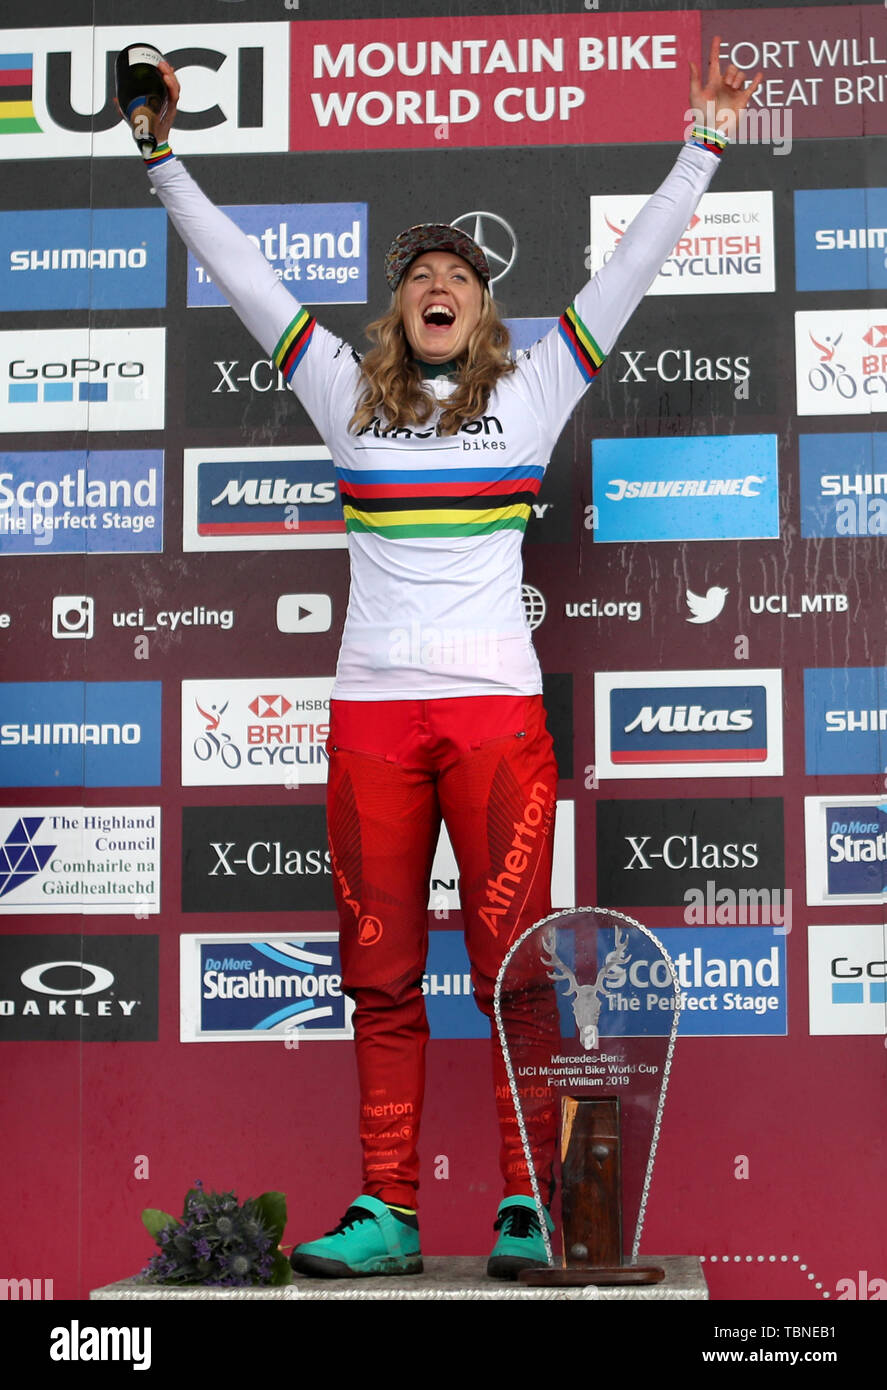 Great Britain's Rachel Atherton on the podium celebrates winning the Women's Downhill during the UCI Mountain Bike World Cup at Fort William. Stock Photo